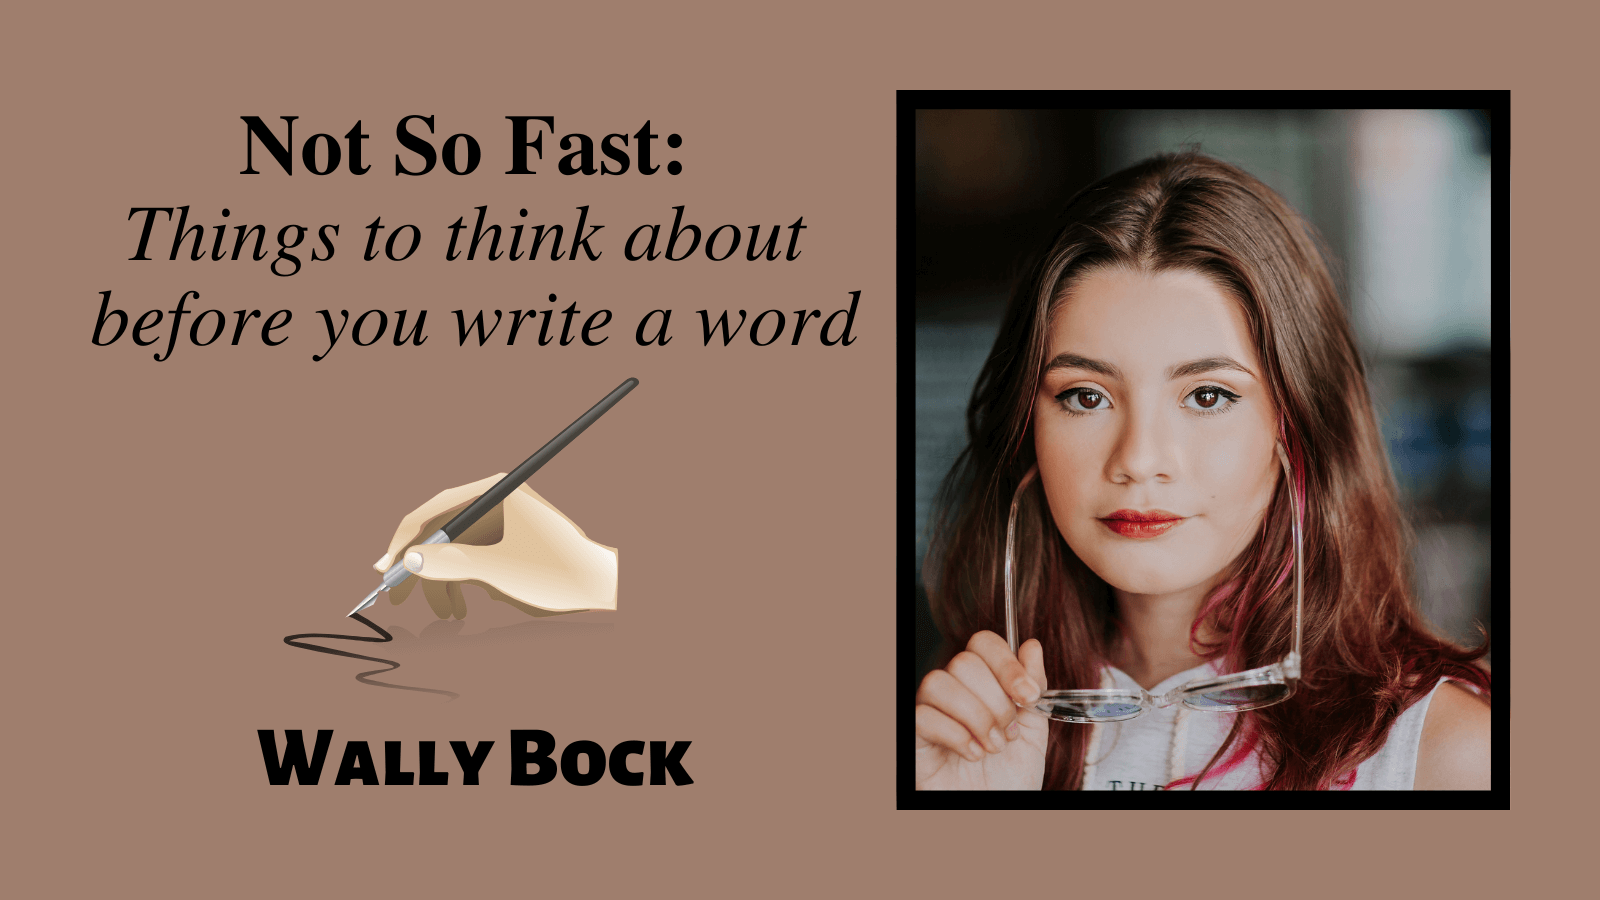 Not so fast: Things to think about before you write a word